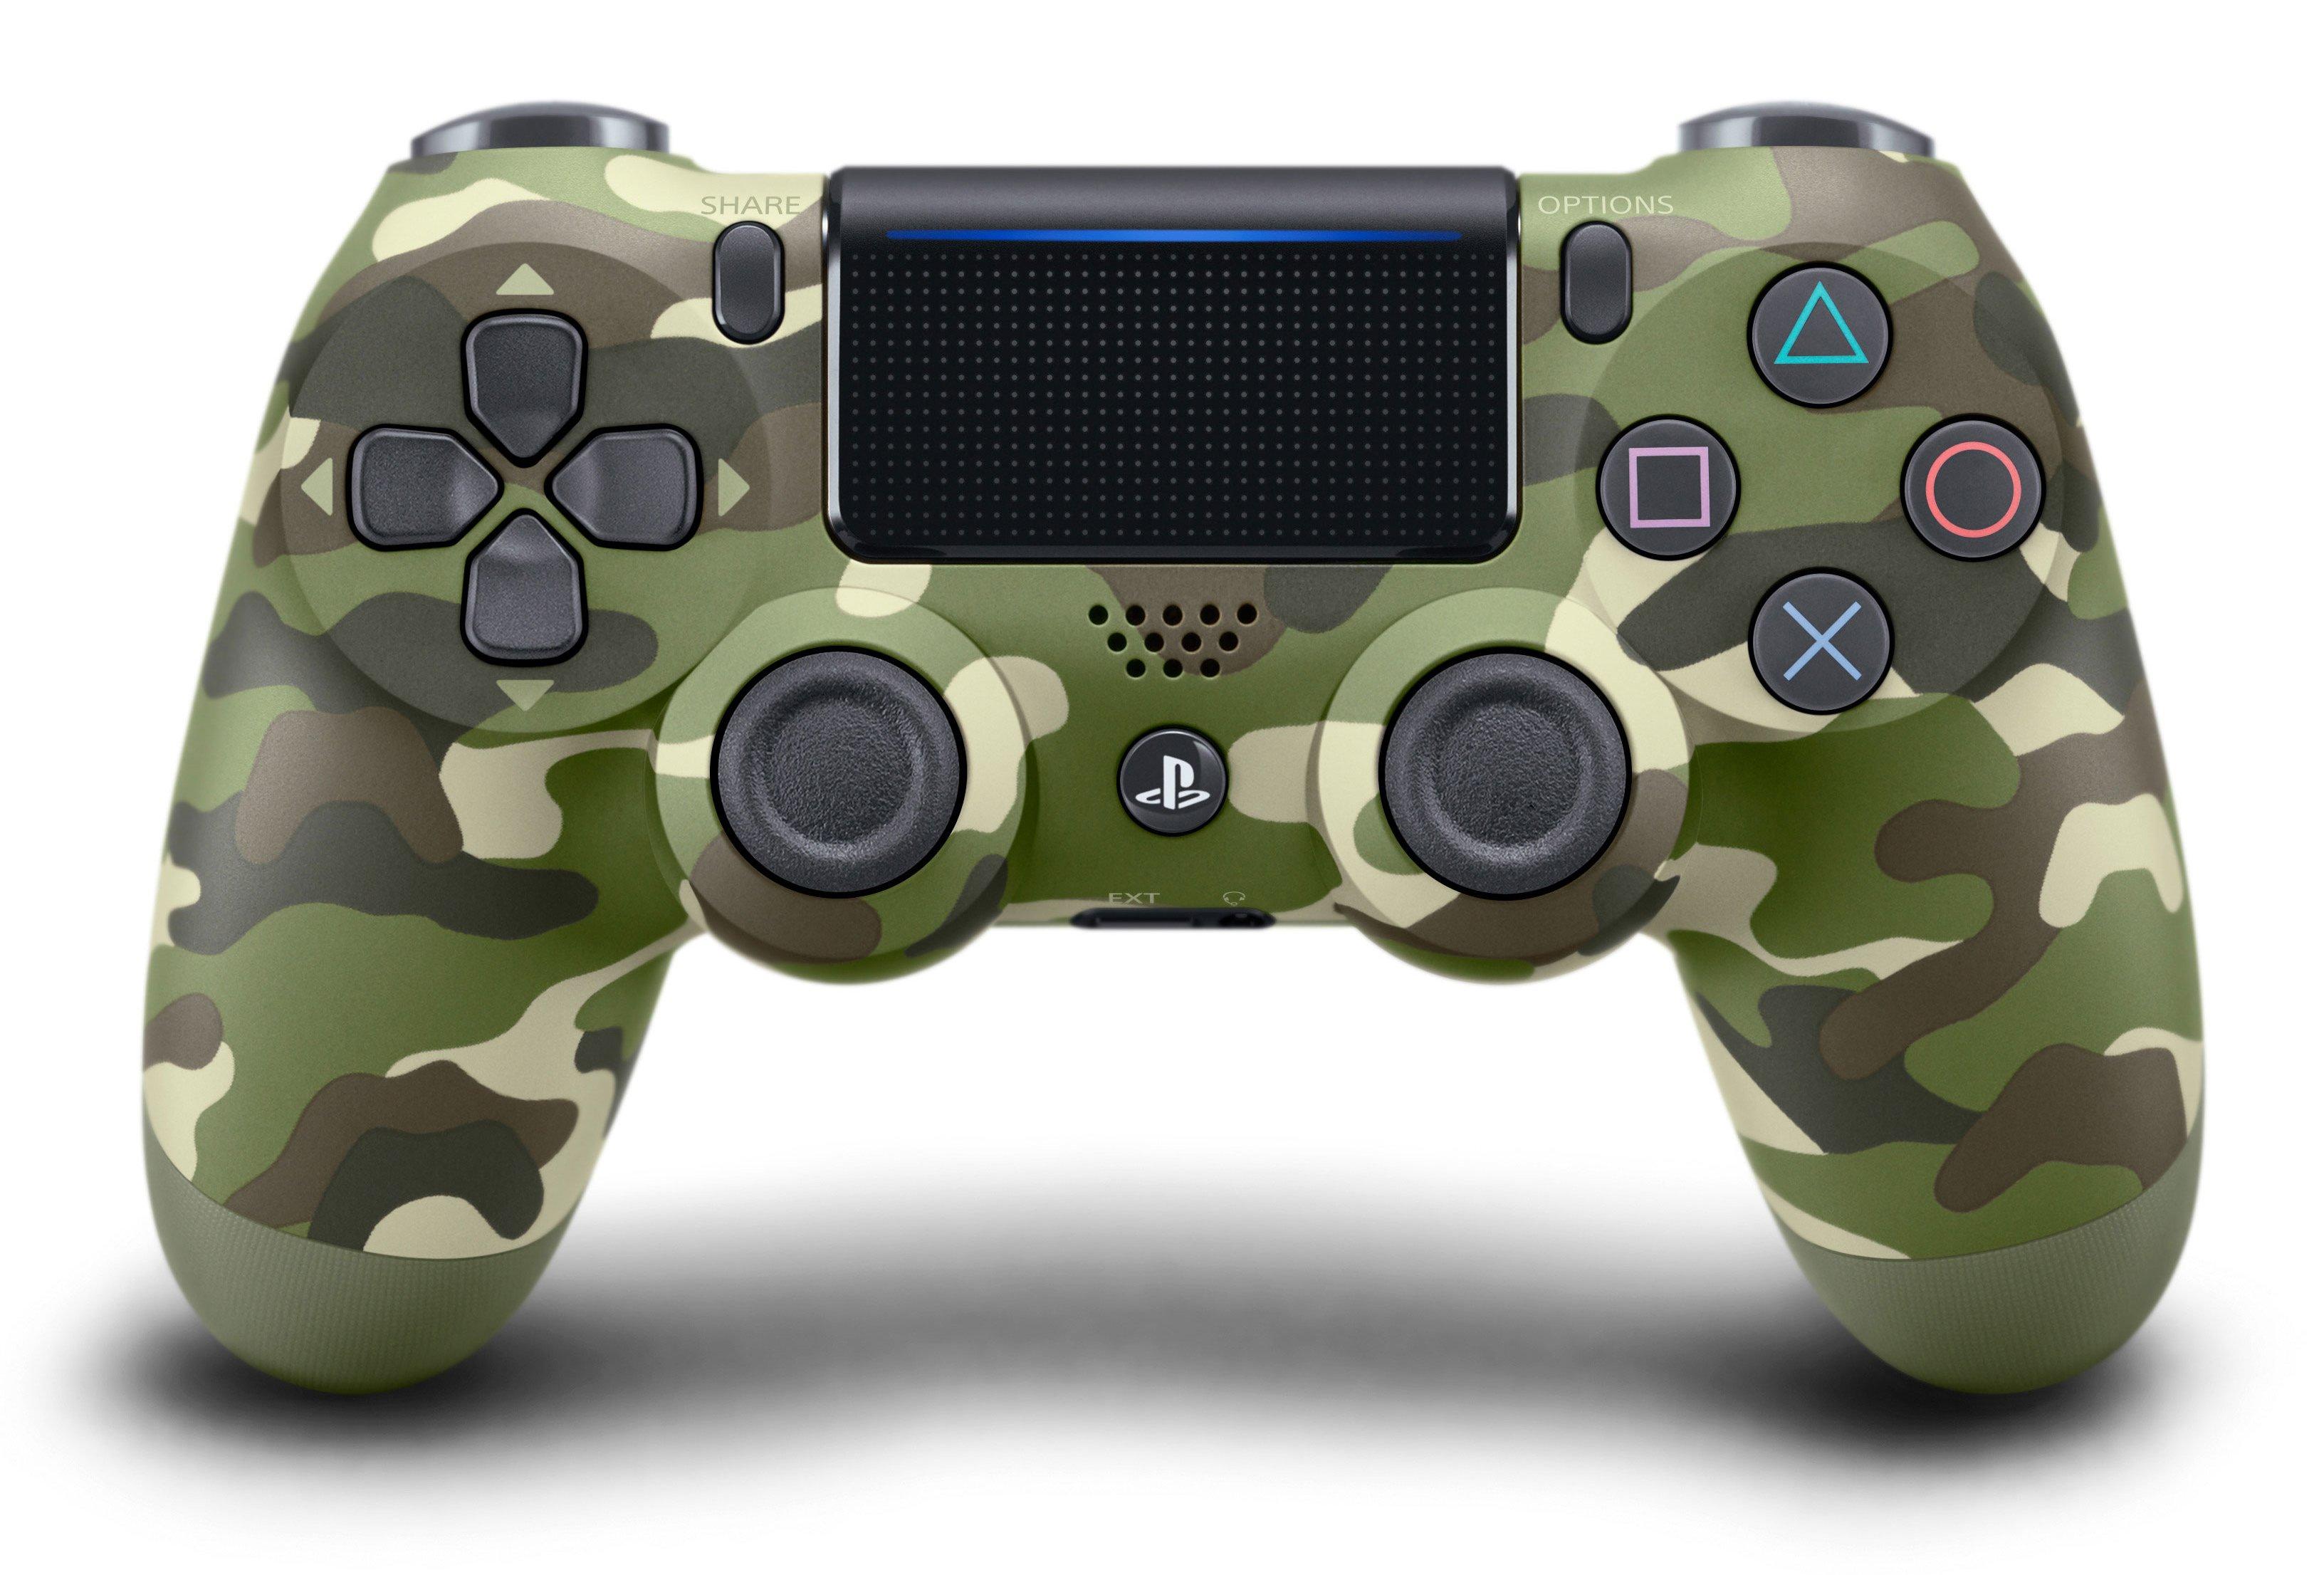 Sony DUALSHOCK 4 Wireless Controller for PlayStation 4 - Green Camo